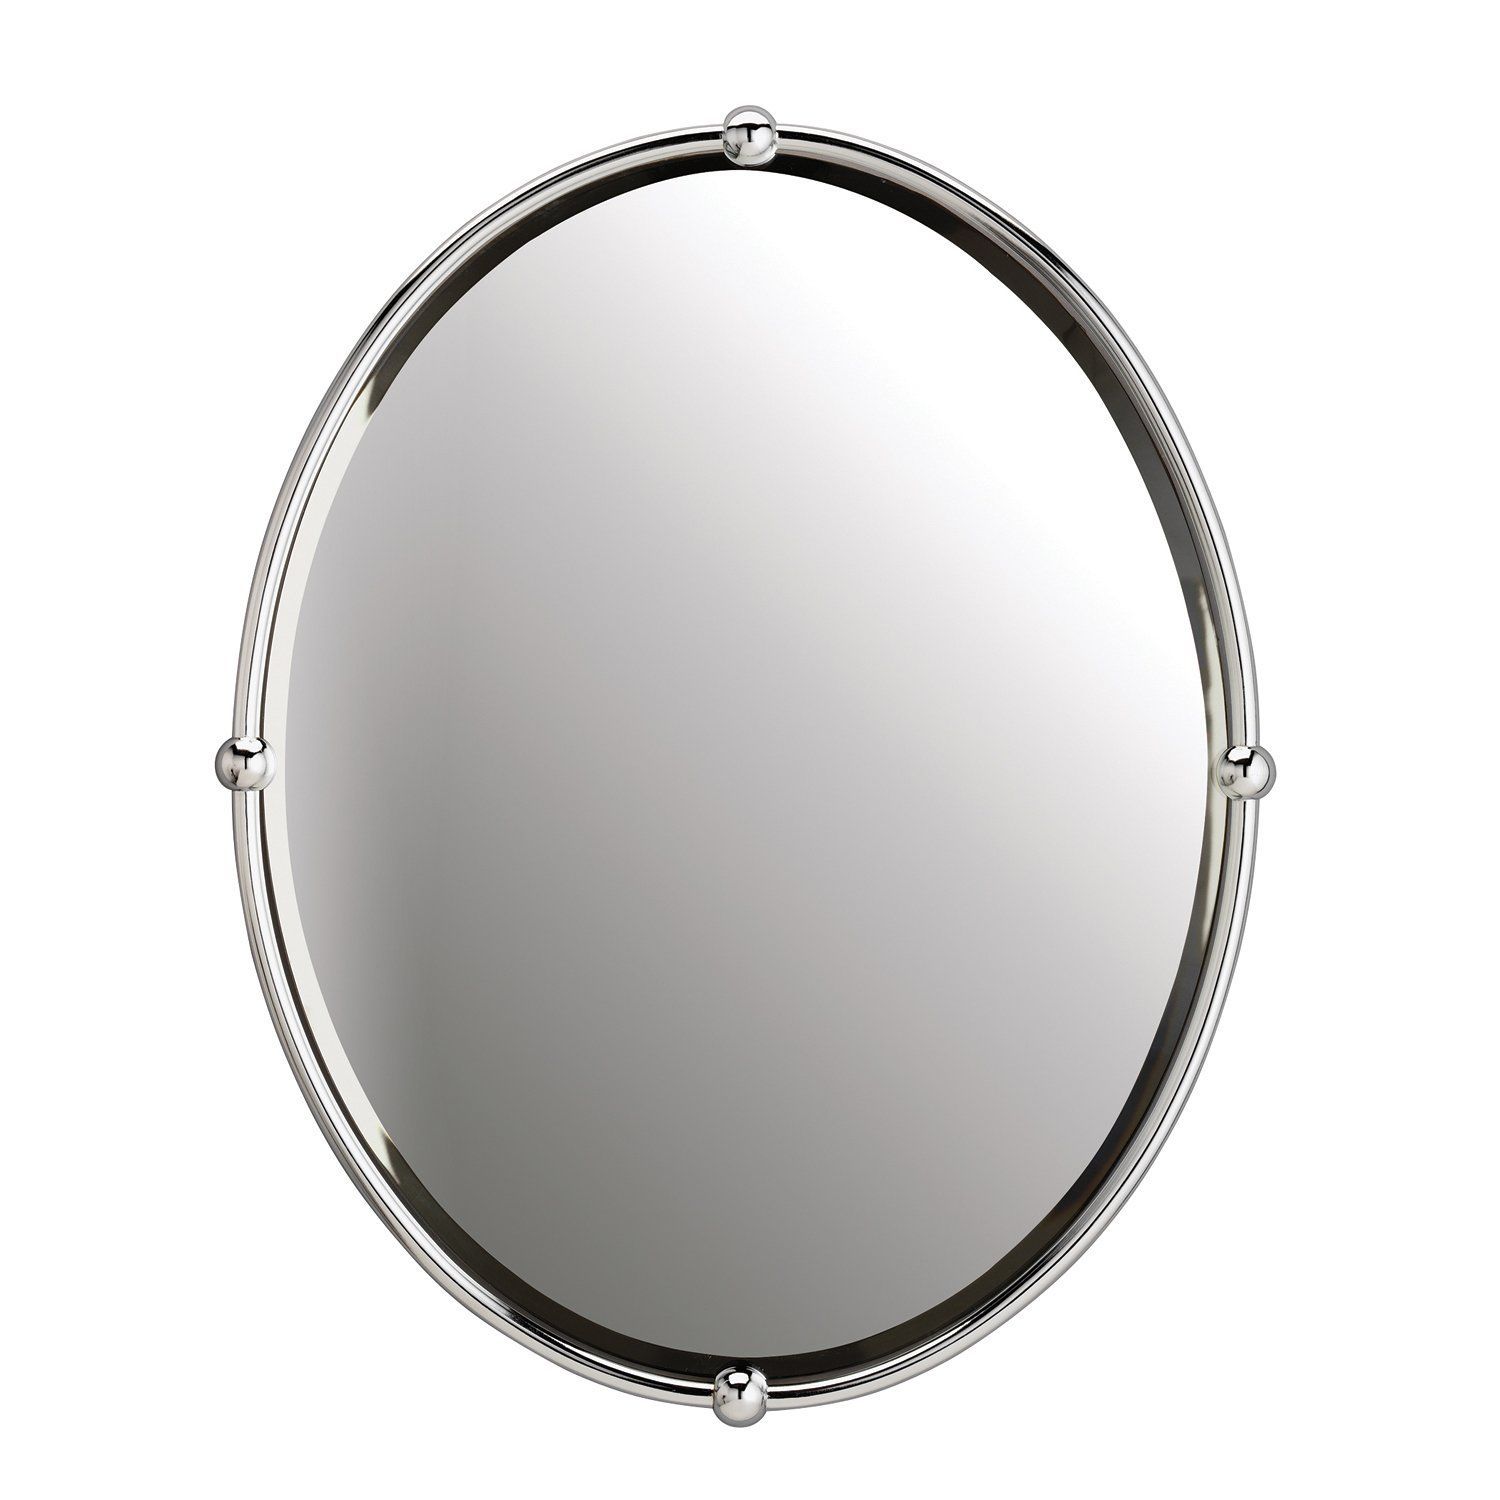 Kichler Lighting 41006 Oval Beveled Wall Mirror | Mirror, Oval Mirror With Oval Beveled Frameless Wall Mirrors (View 10 of 15)